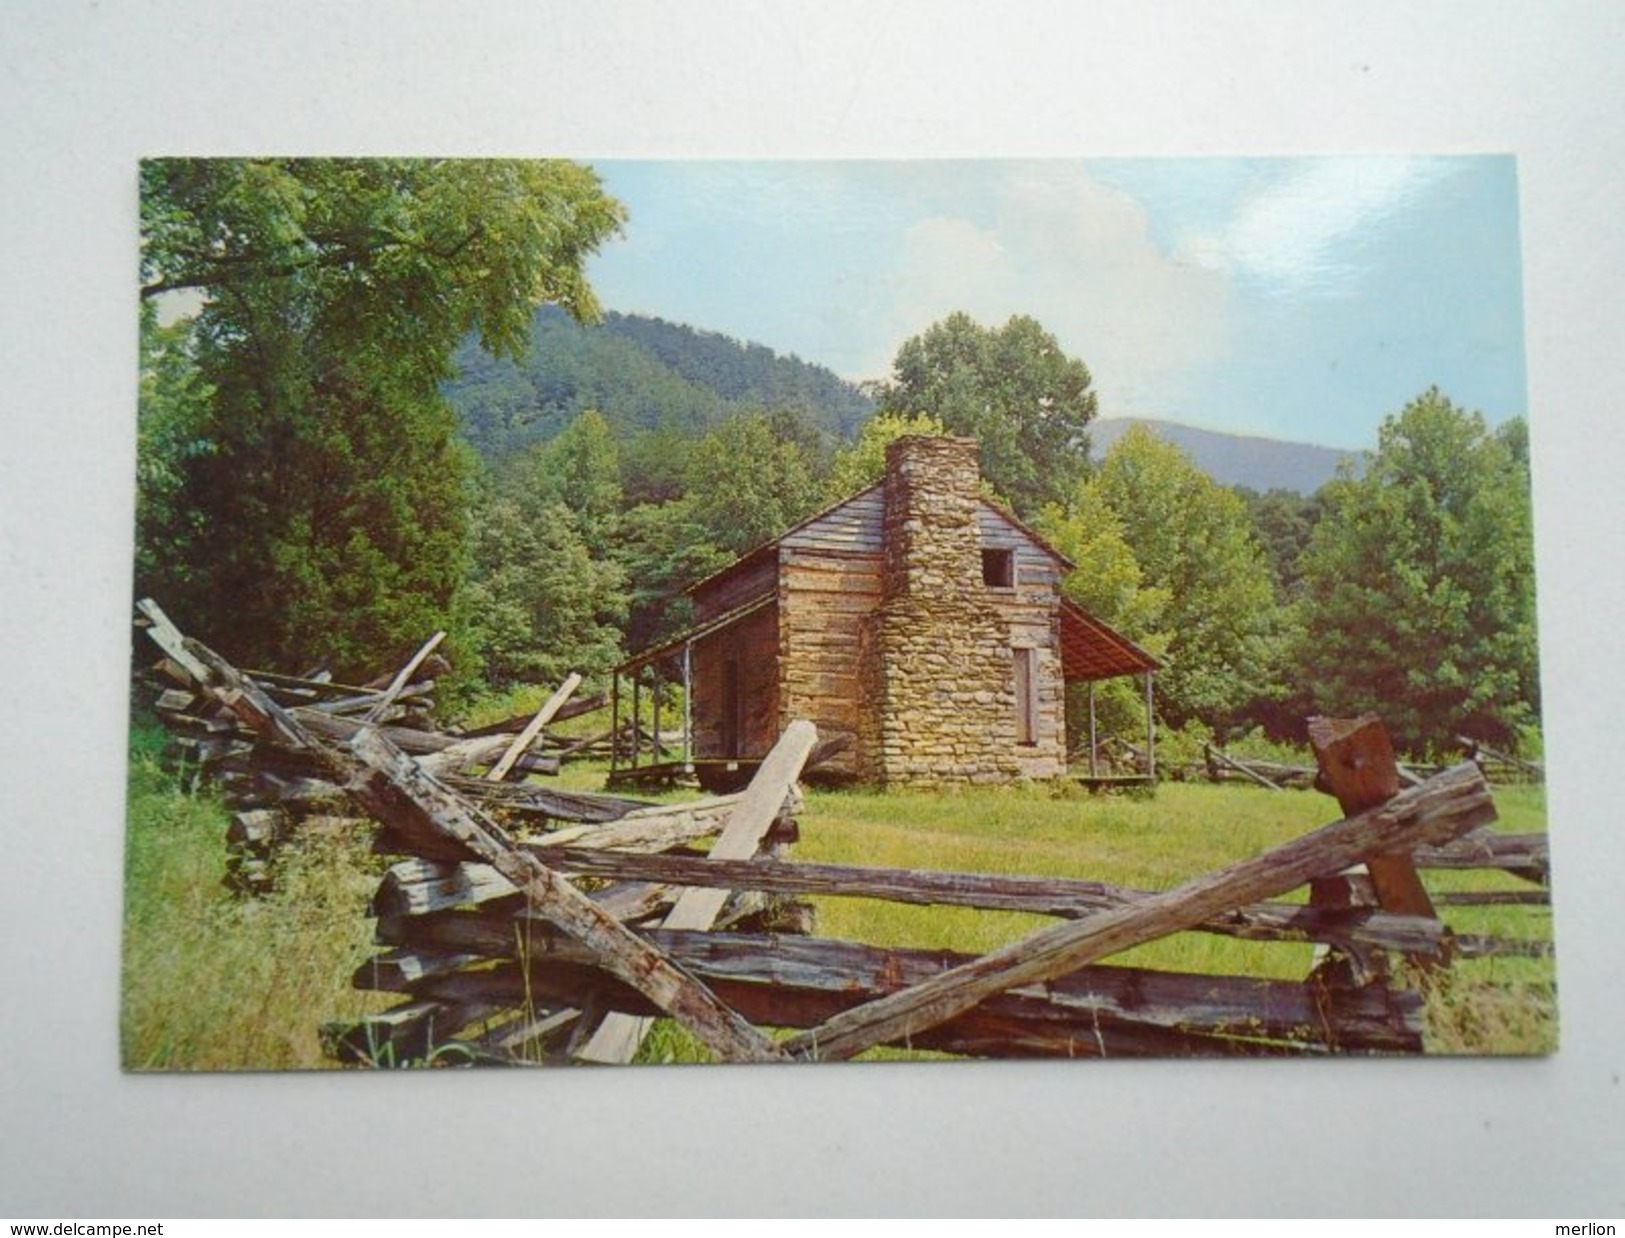 D155438  US -  John Oliver Cabin, Cades Cover, Great Smoky Mountains National Park, Veteran Of War Of 1812 - Knoxville